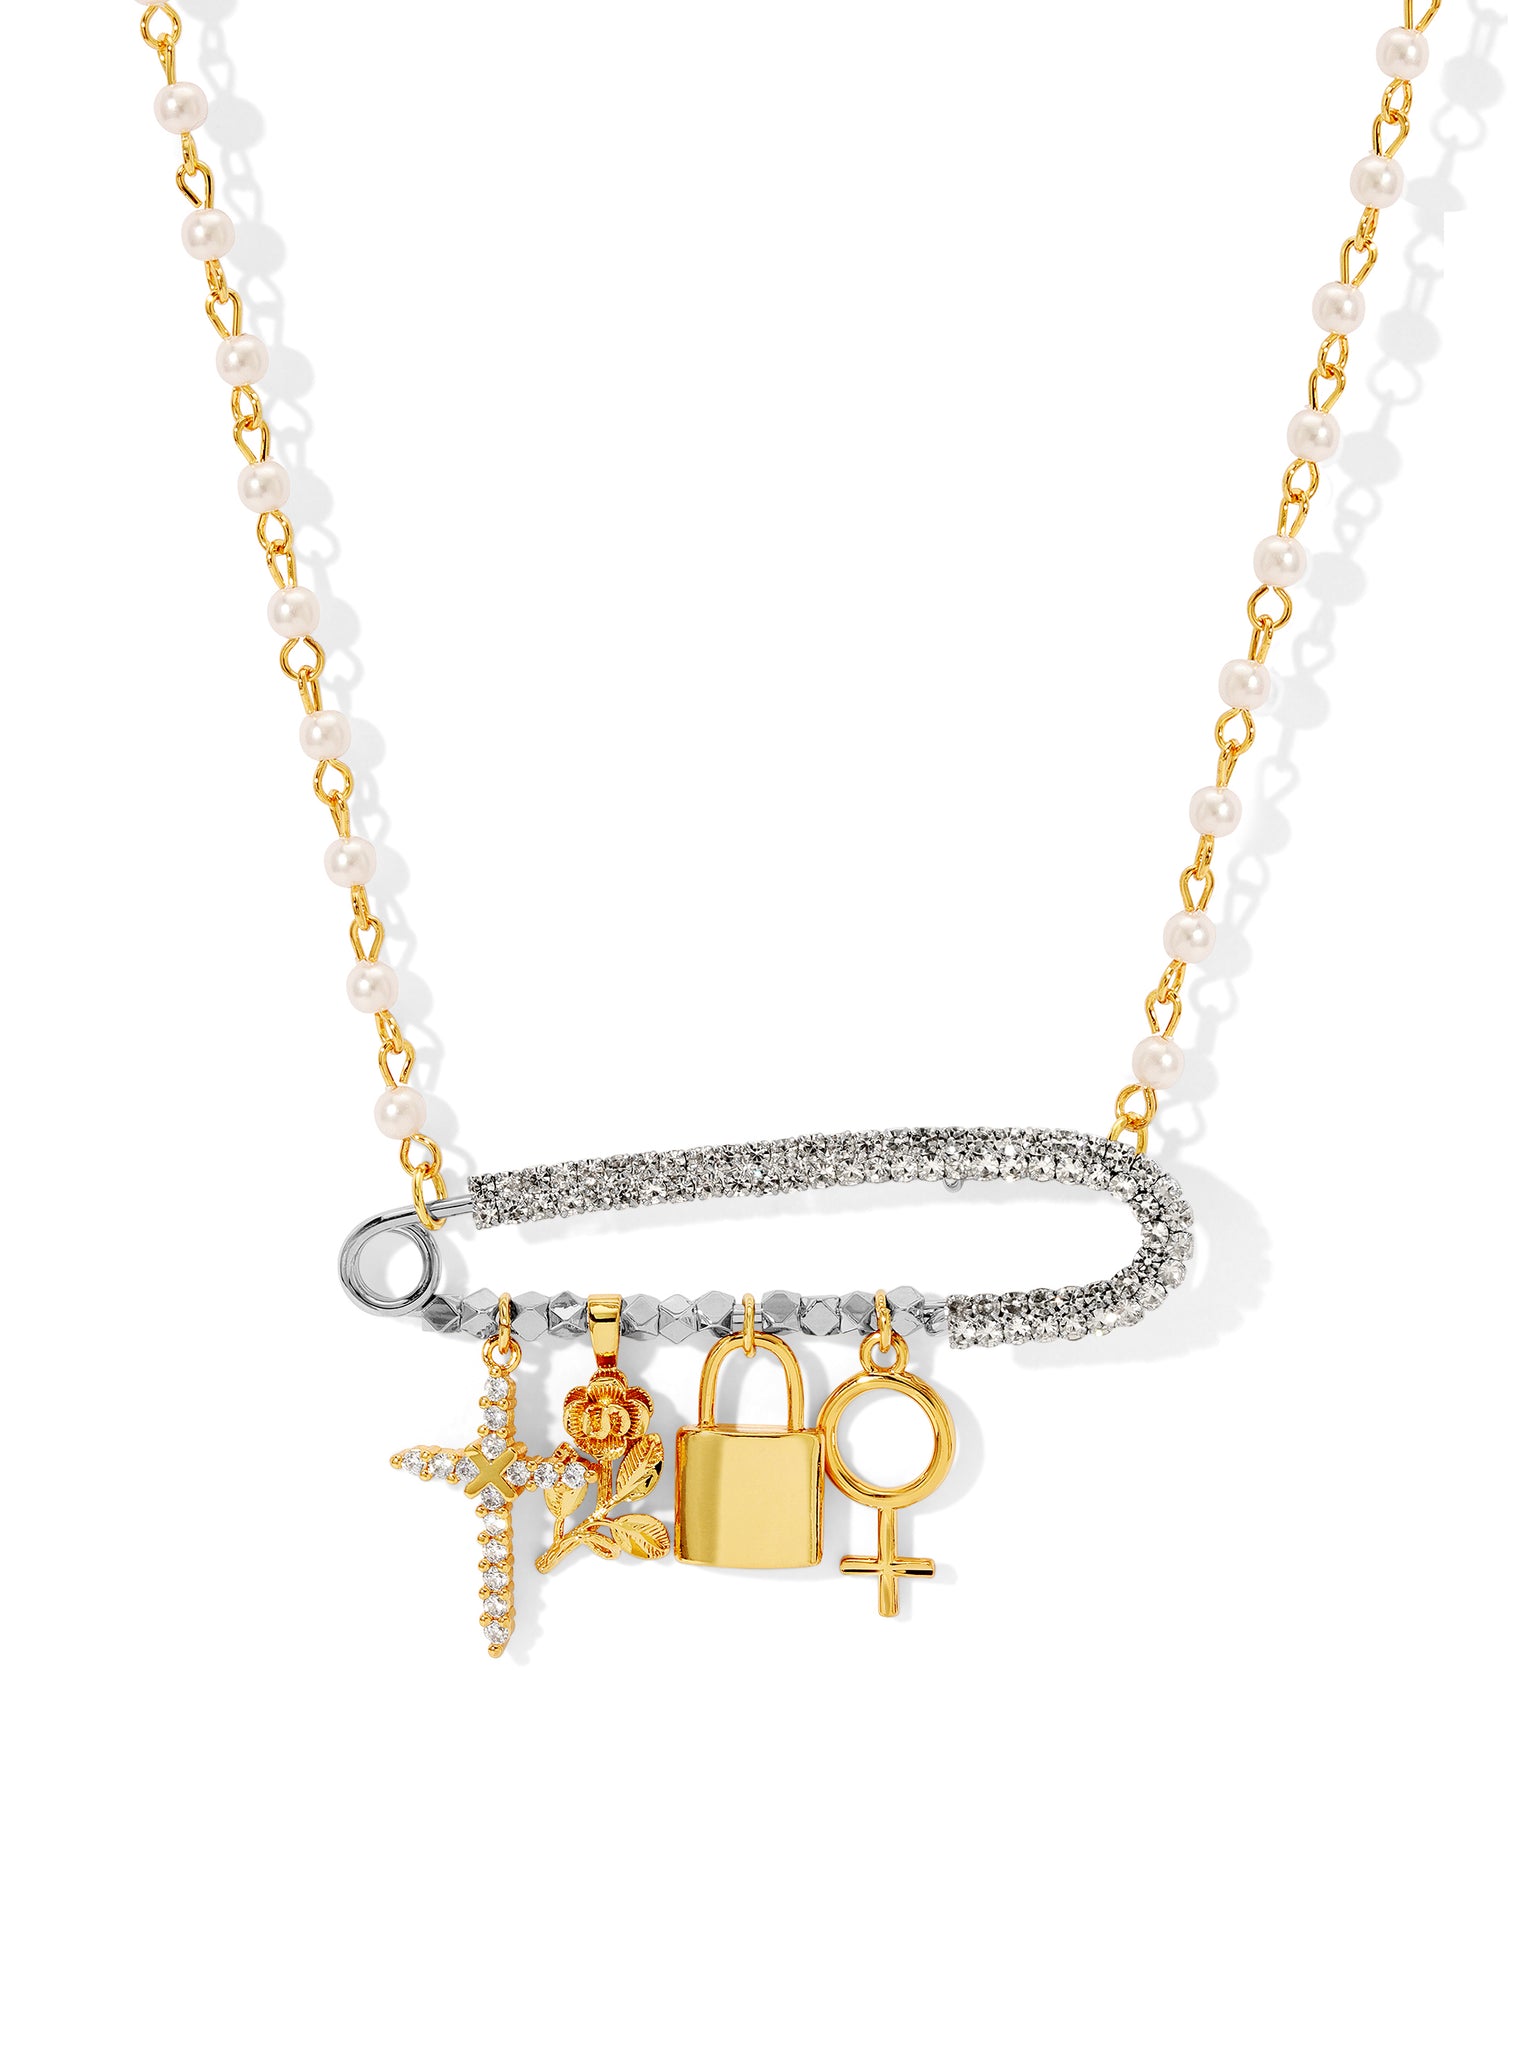 The Love Locked Necklace